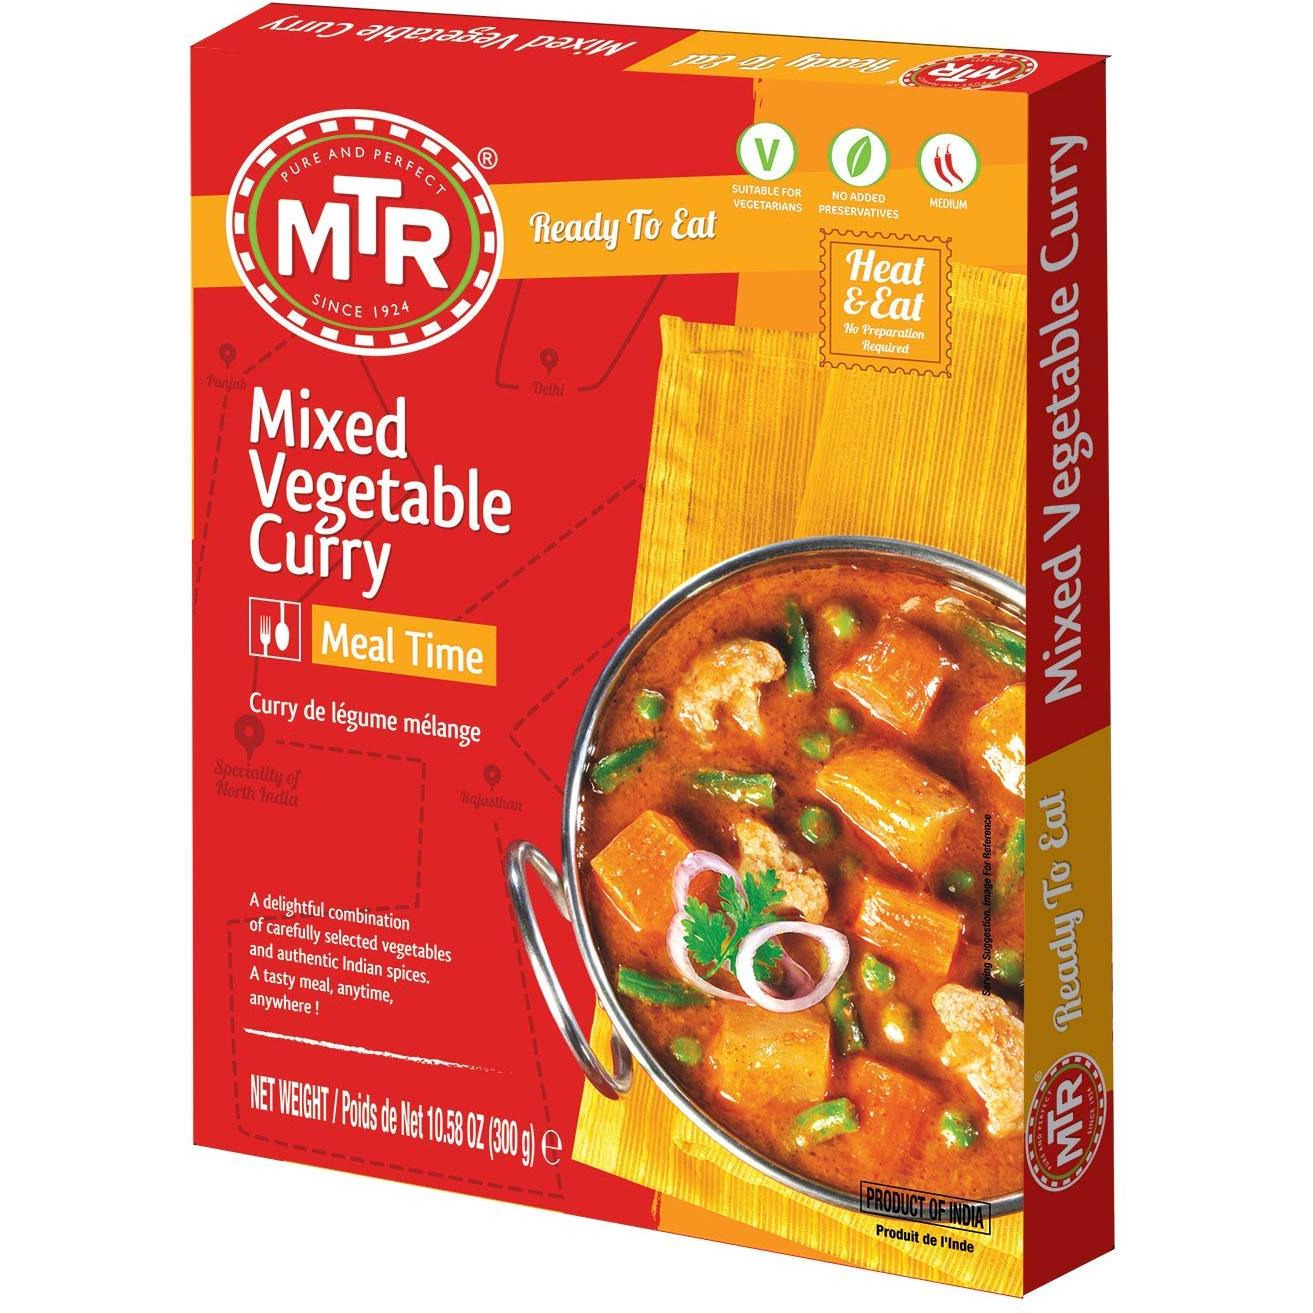 Case of 20 - Mtr Ready To Eat Mixed Veg Curry - 300 Gm (10.58 Oz)